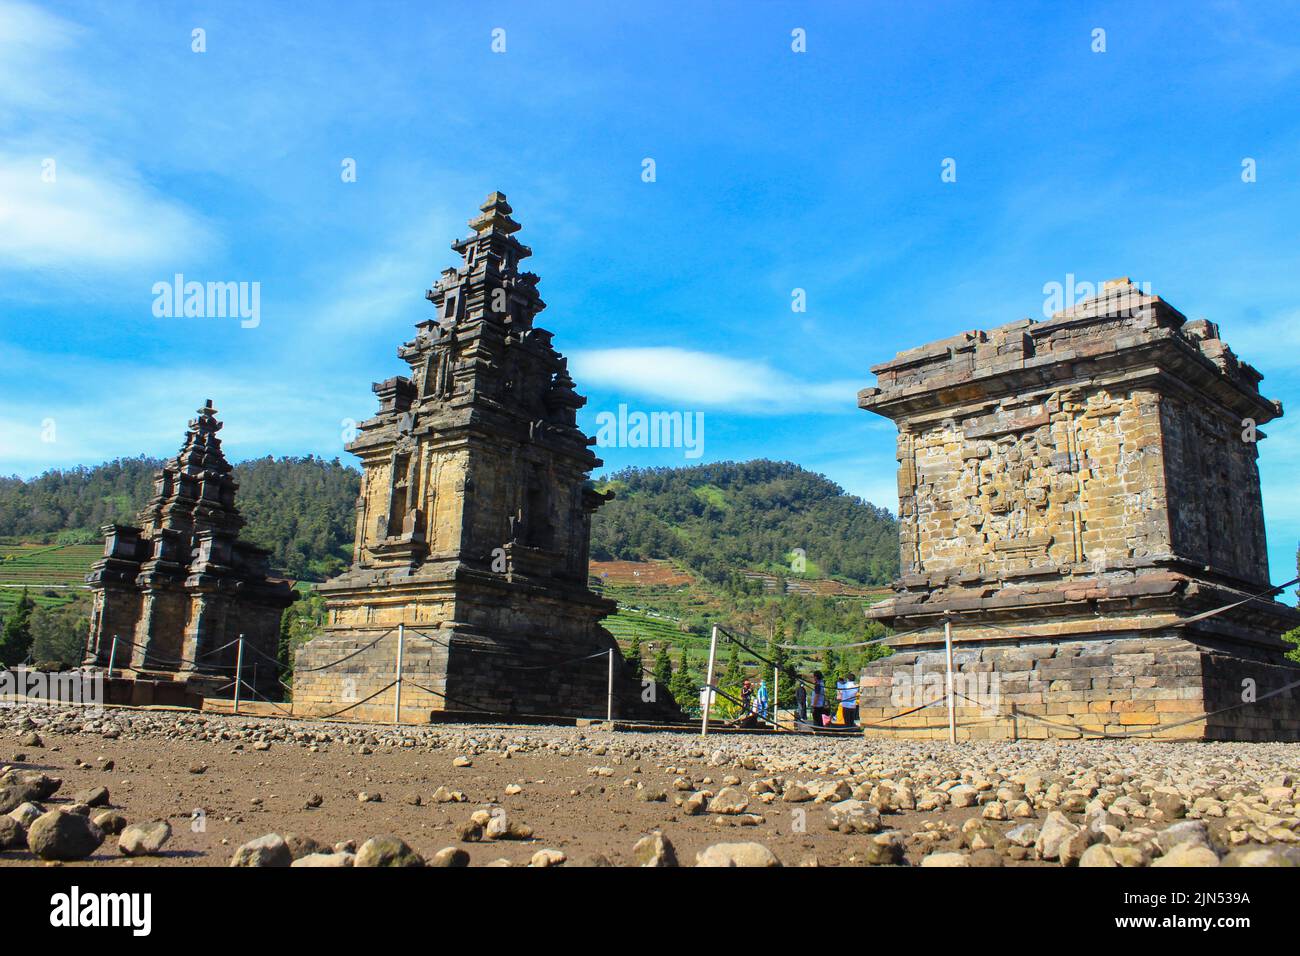 Wonosobo, Indonesia - June 2020 : Local tourists visit Arjuna temple complex at Dieng Plateau after the covid 19 emergency response period Stock Photo